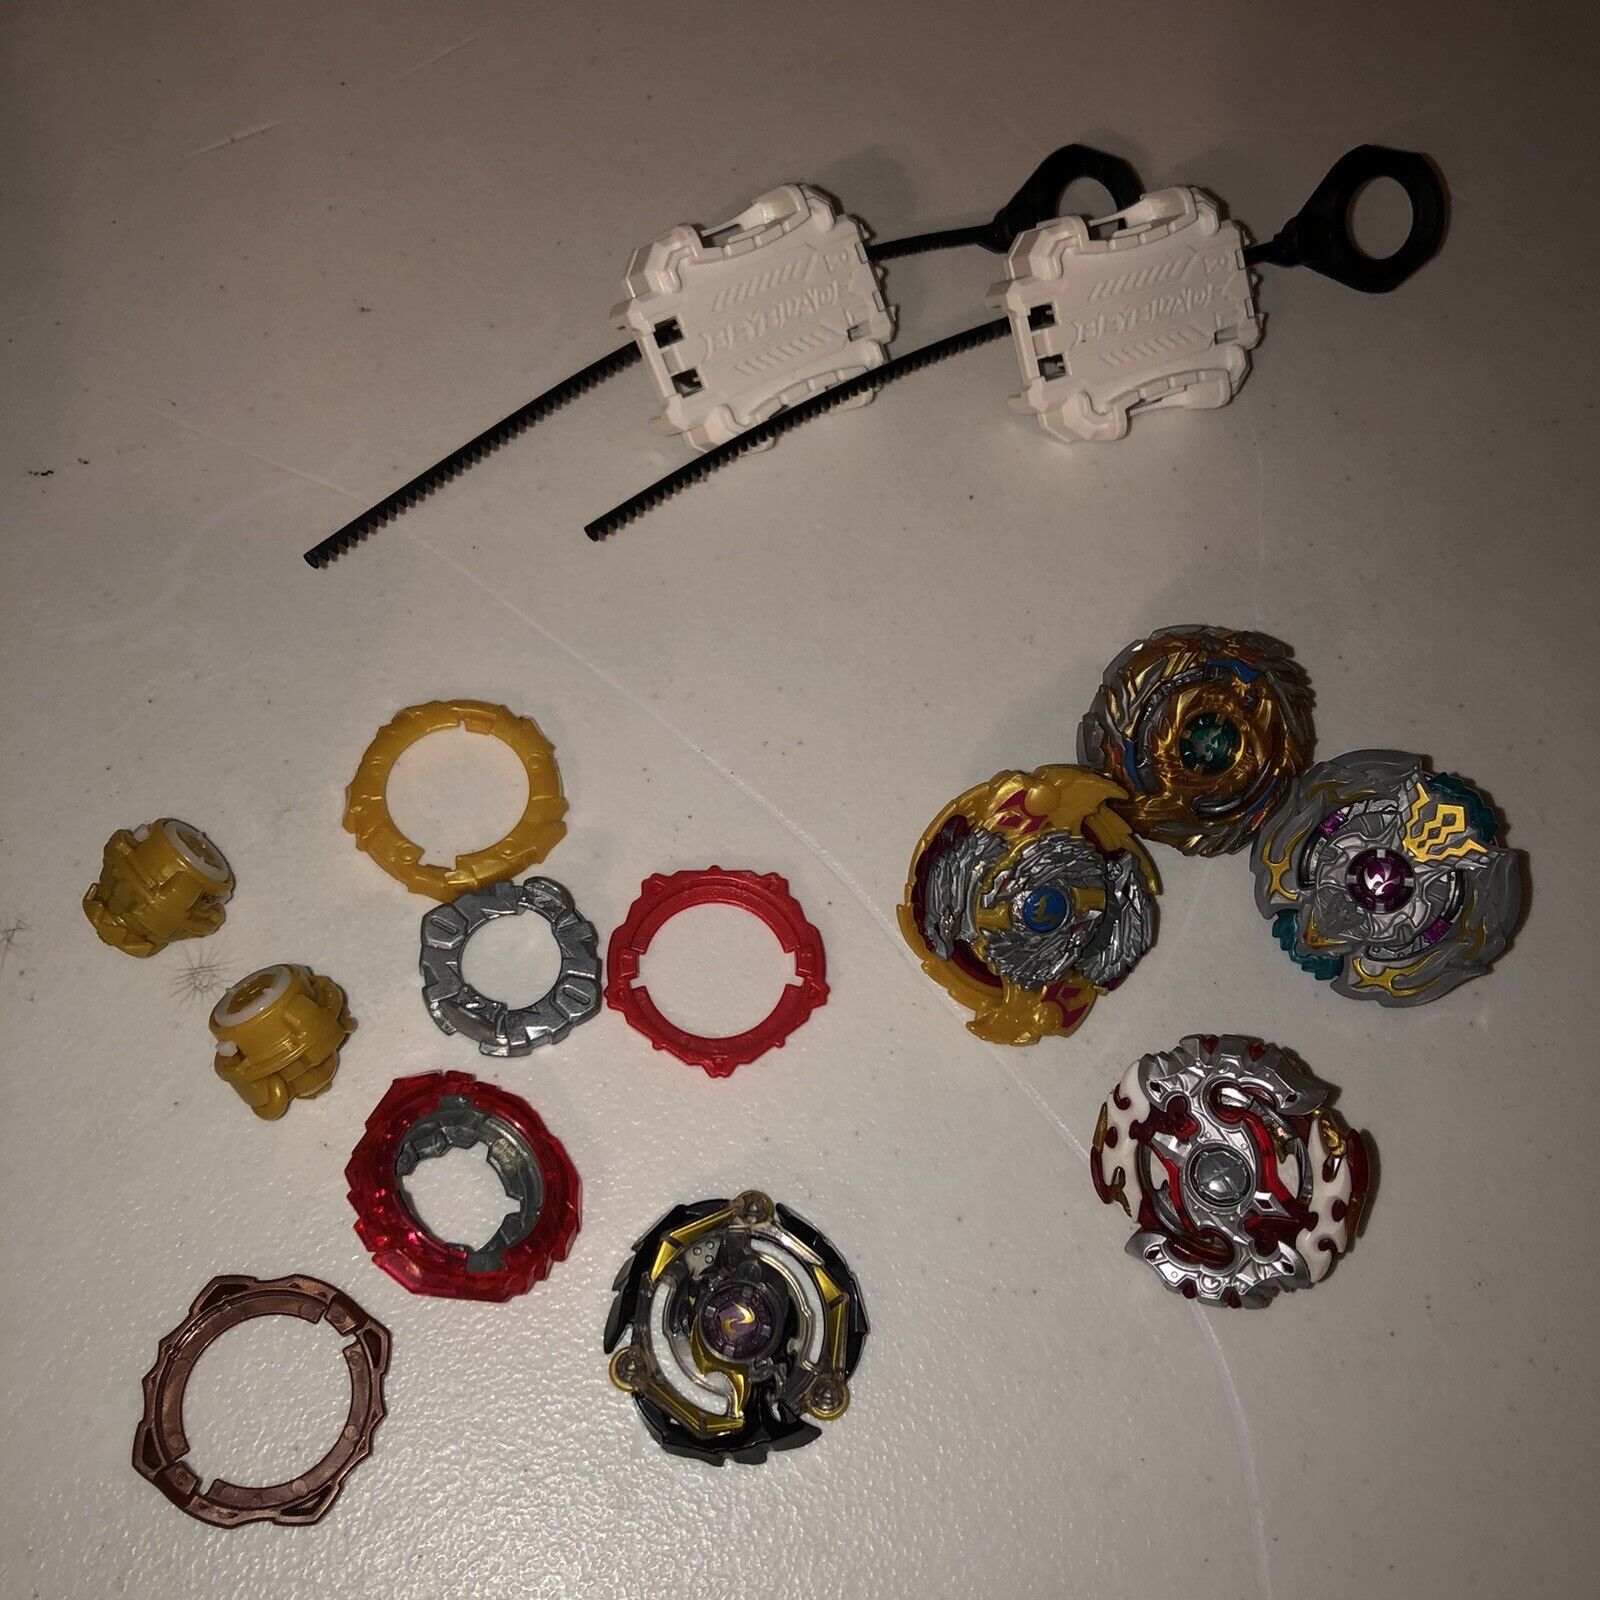 Beyblade METAL Lot Of 4 Beyblades And Launchers Part Pieces 2000s